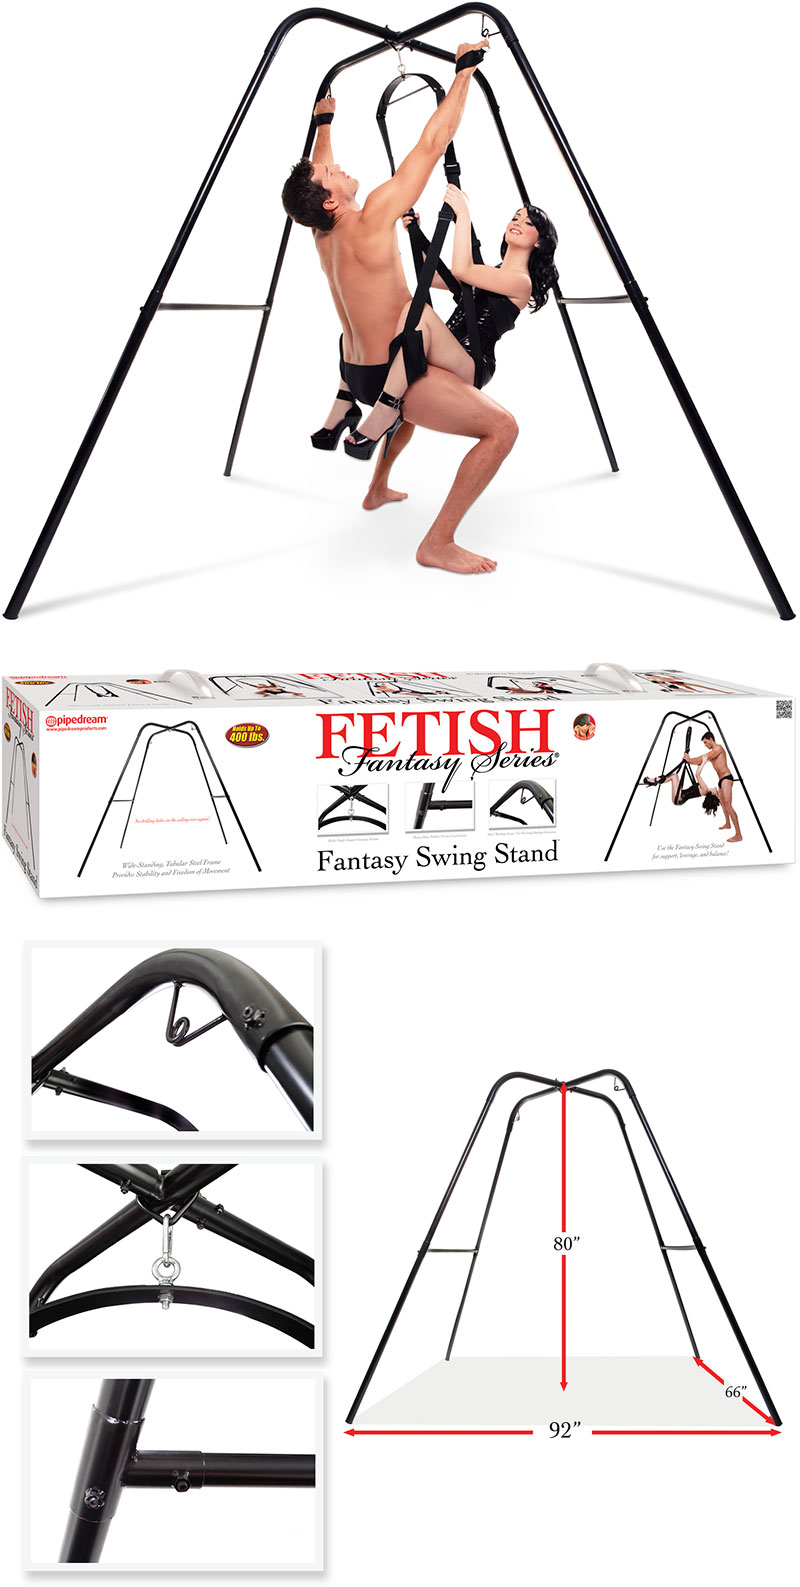 Pipedream Fetish Fantasy Swing Stand